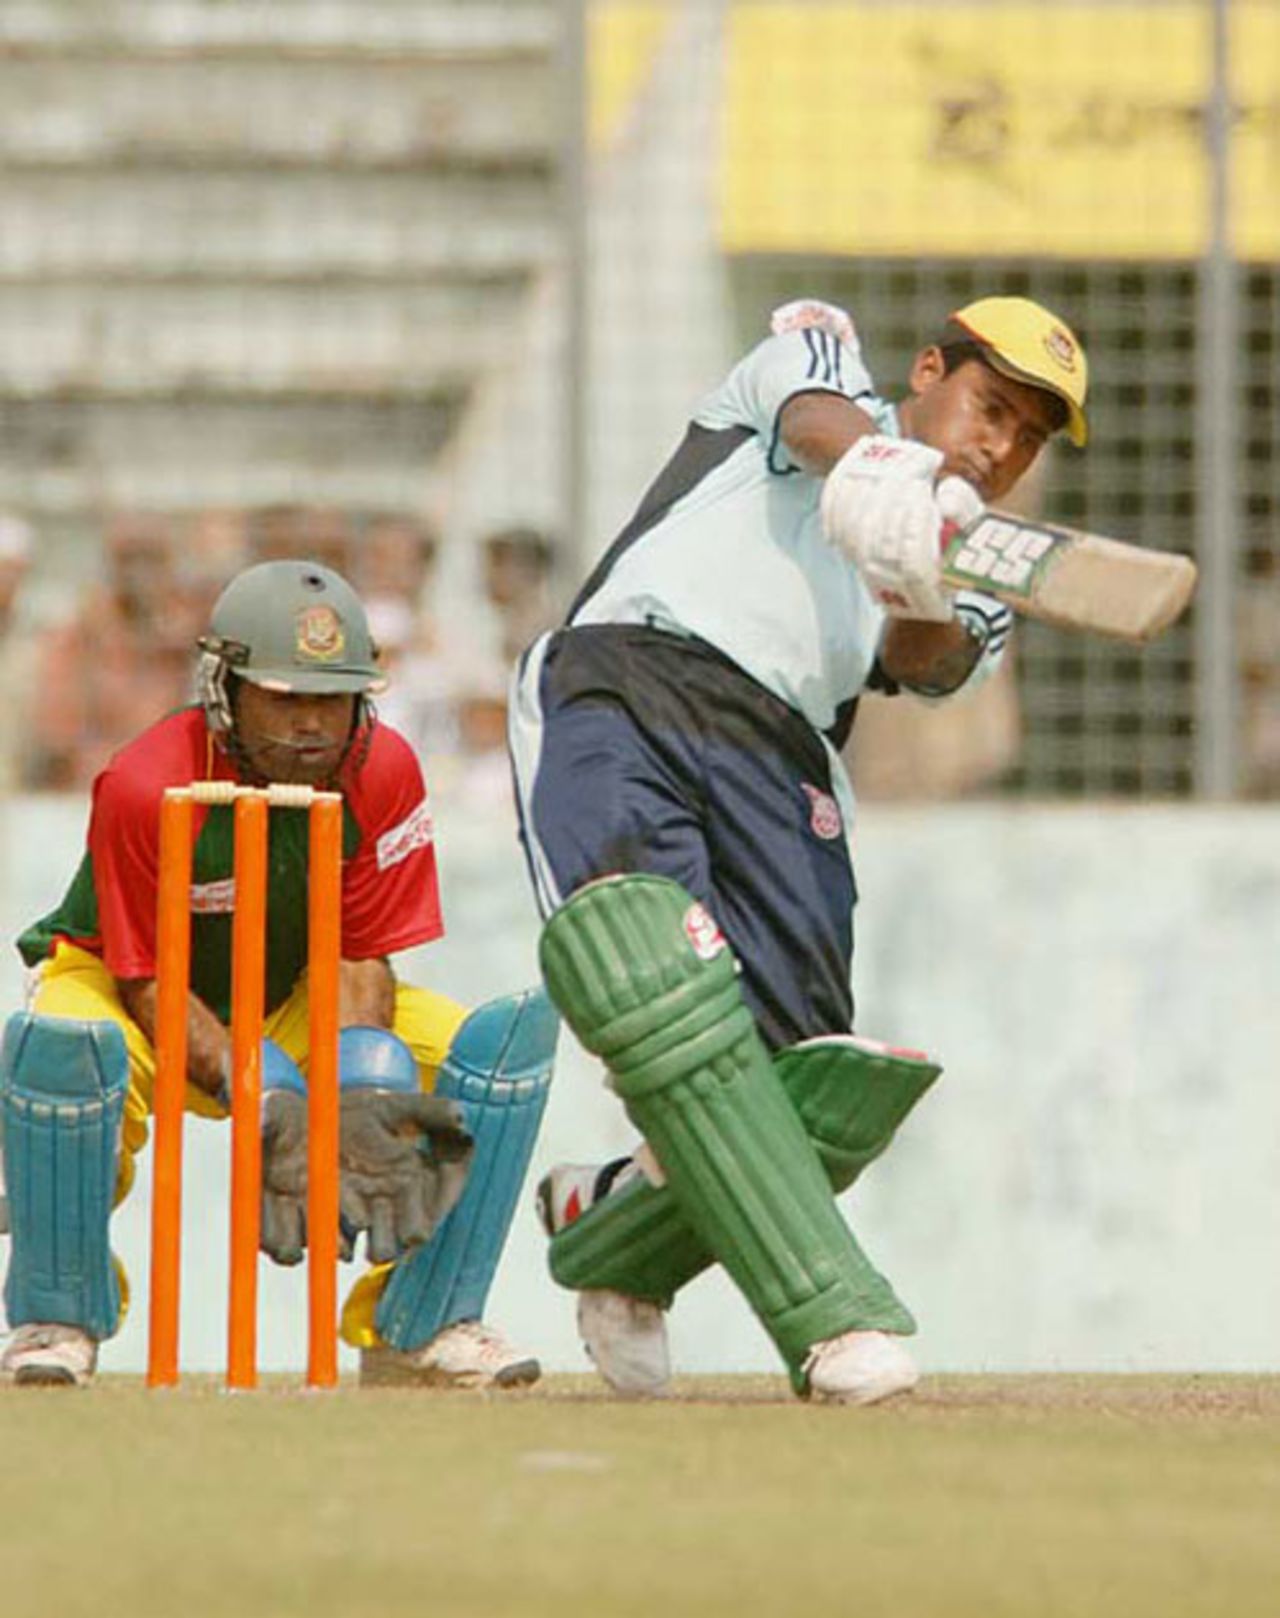 Imrul Kayes, the Khulna opener, lofts down the ground during his 71, Dhaka Division v Khulna Division, October 22, 2007